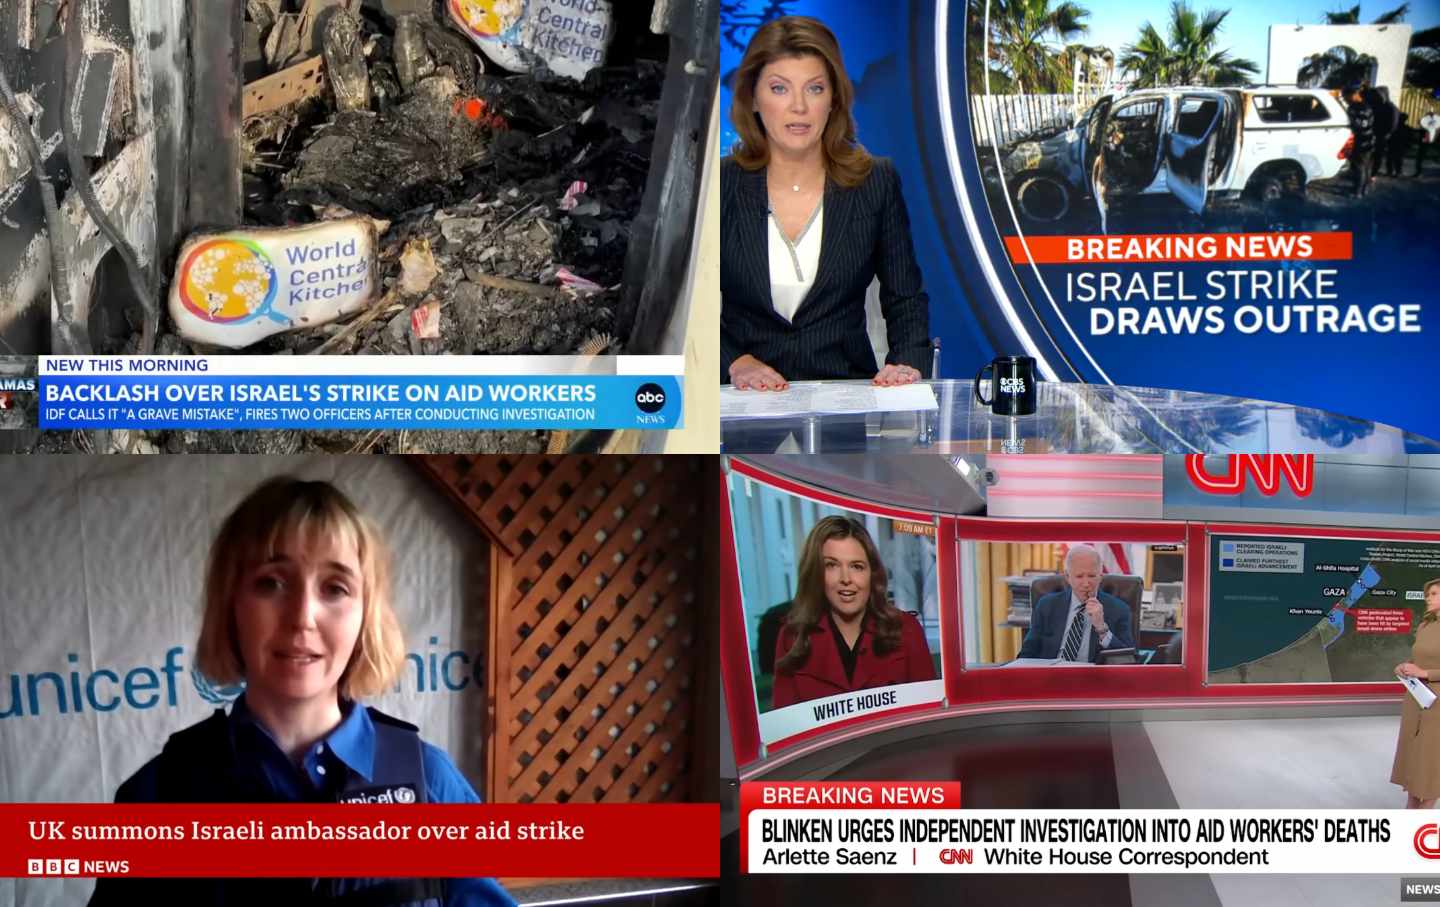 Screenshots of media coverage of the World Central Kitchen attack.